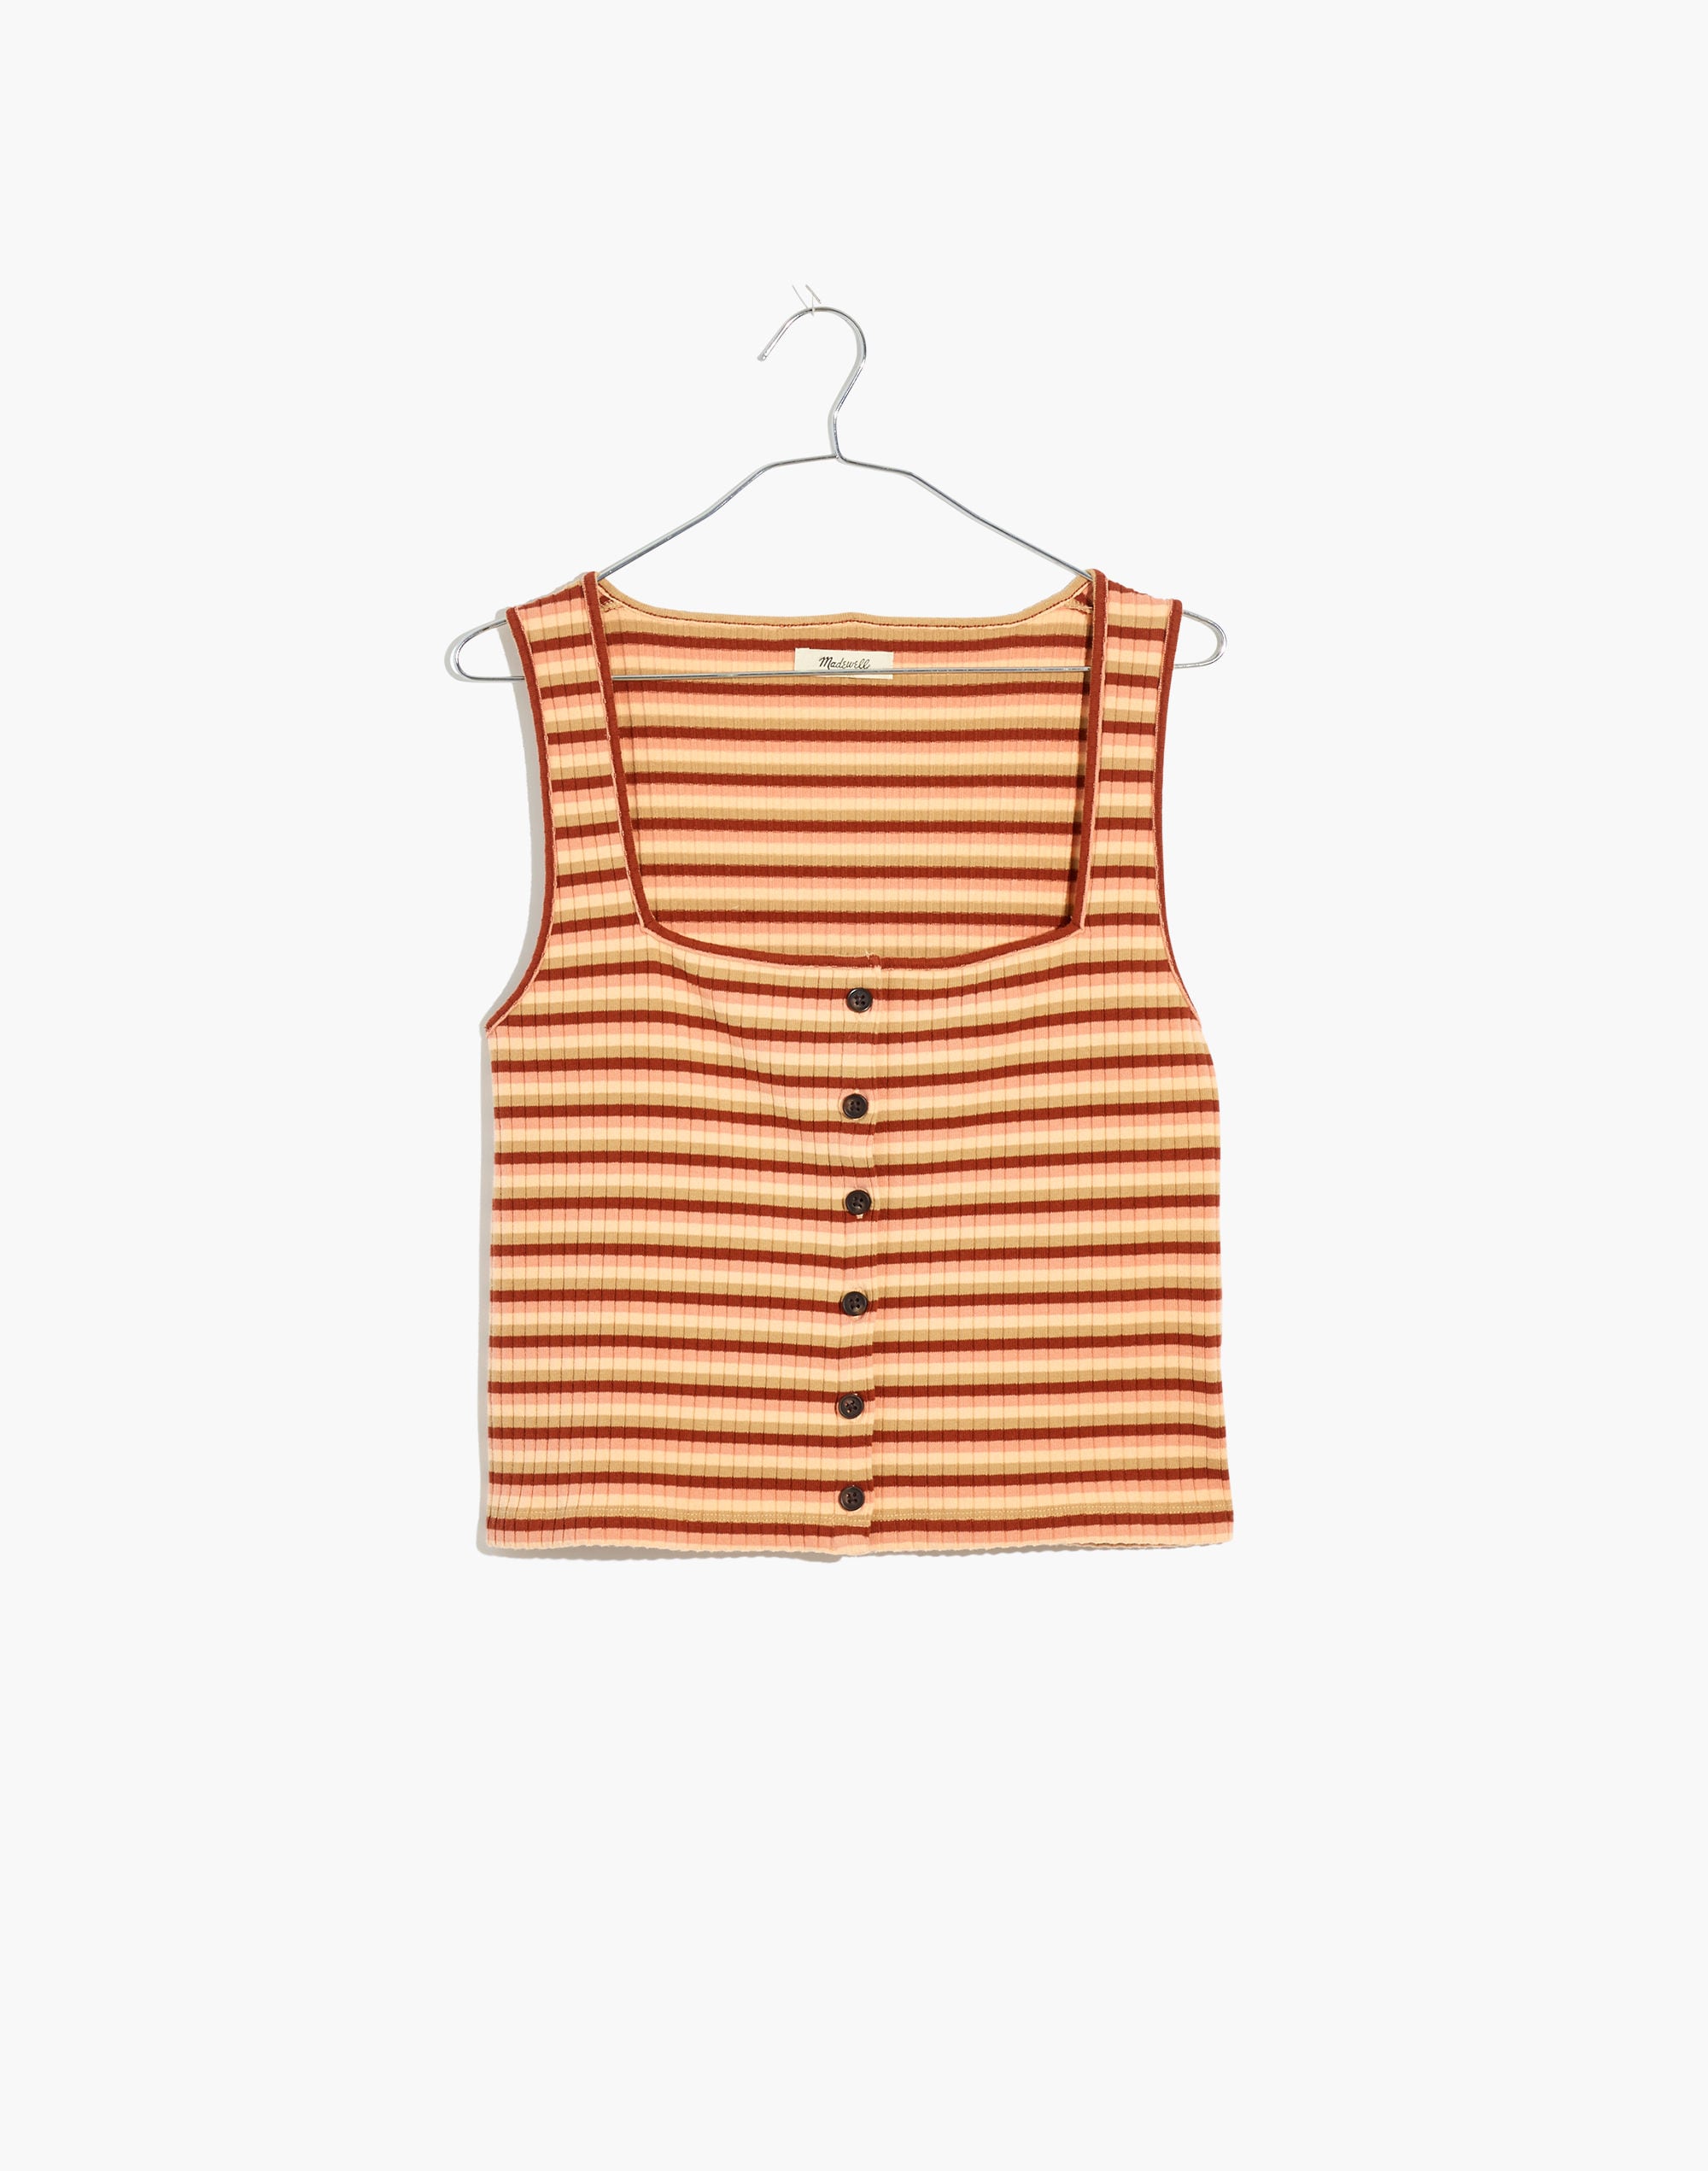 Madewell, Tops, Nwt Madewell Varigated Striped Crop Racer Back Built In Shelf  Bra Tank Top M